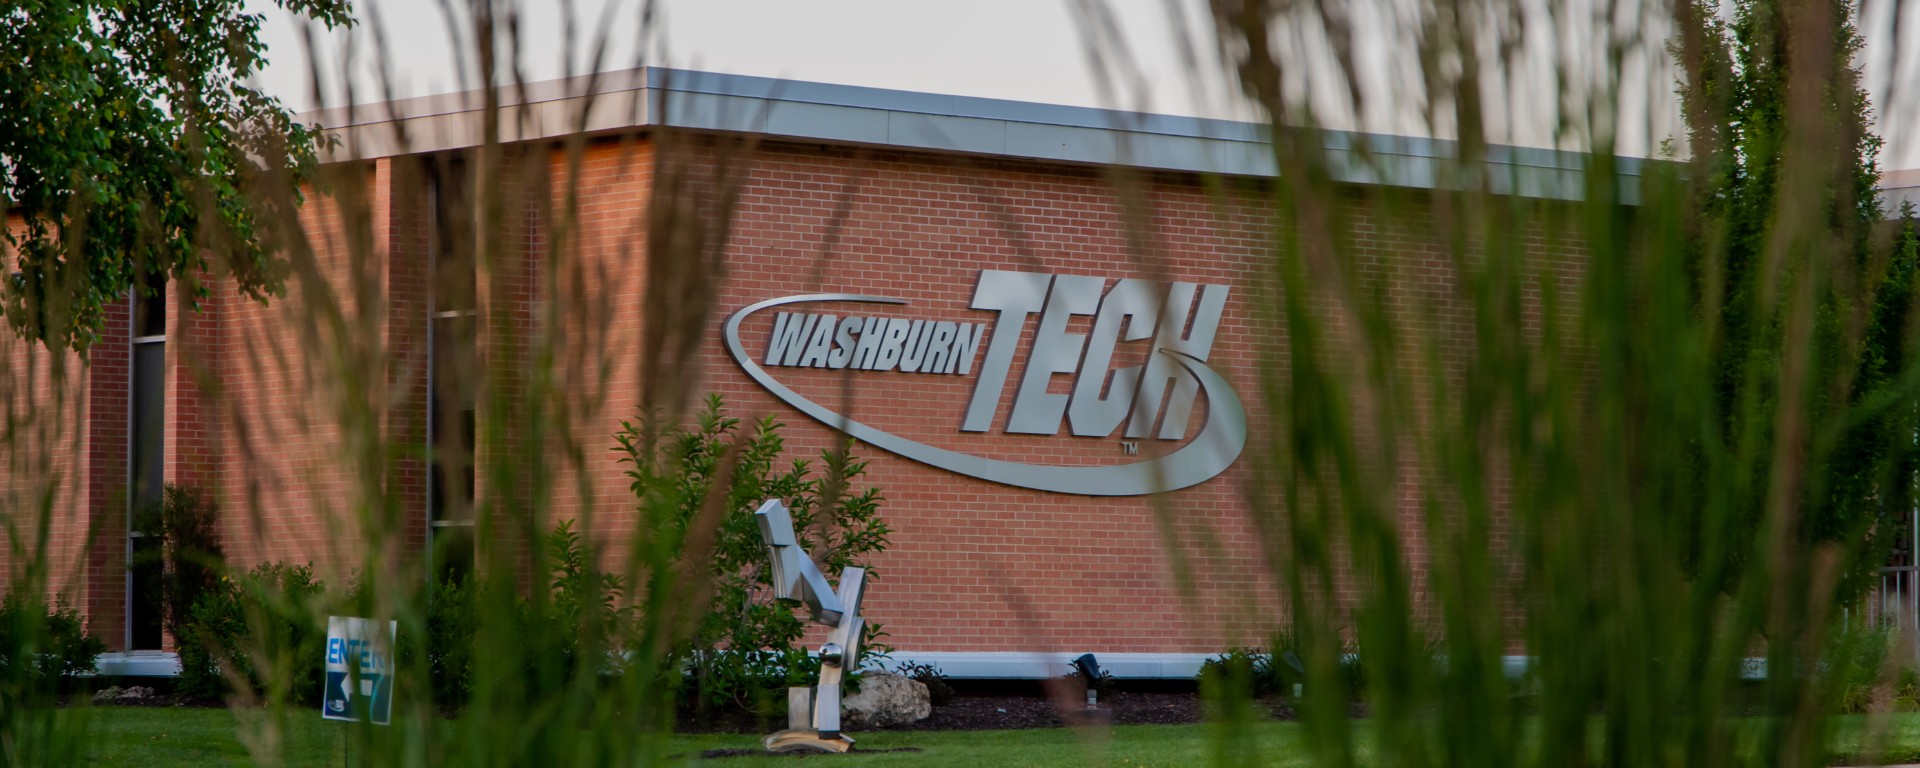 Washburn Tech exterior logo with grasses in foreground